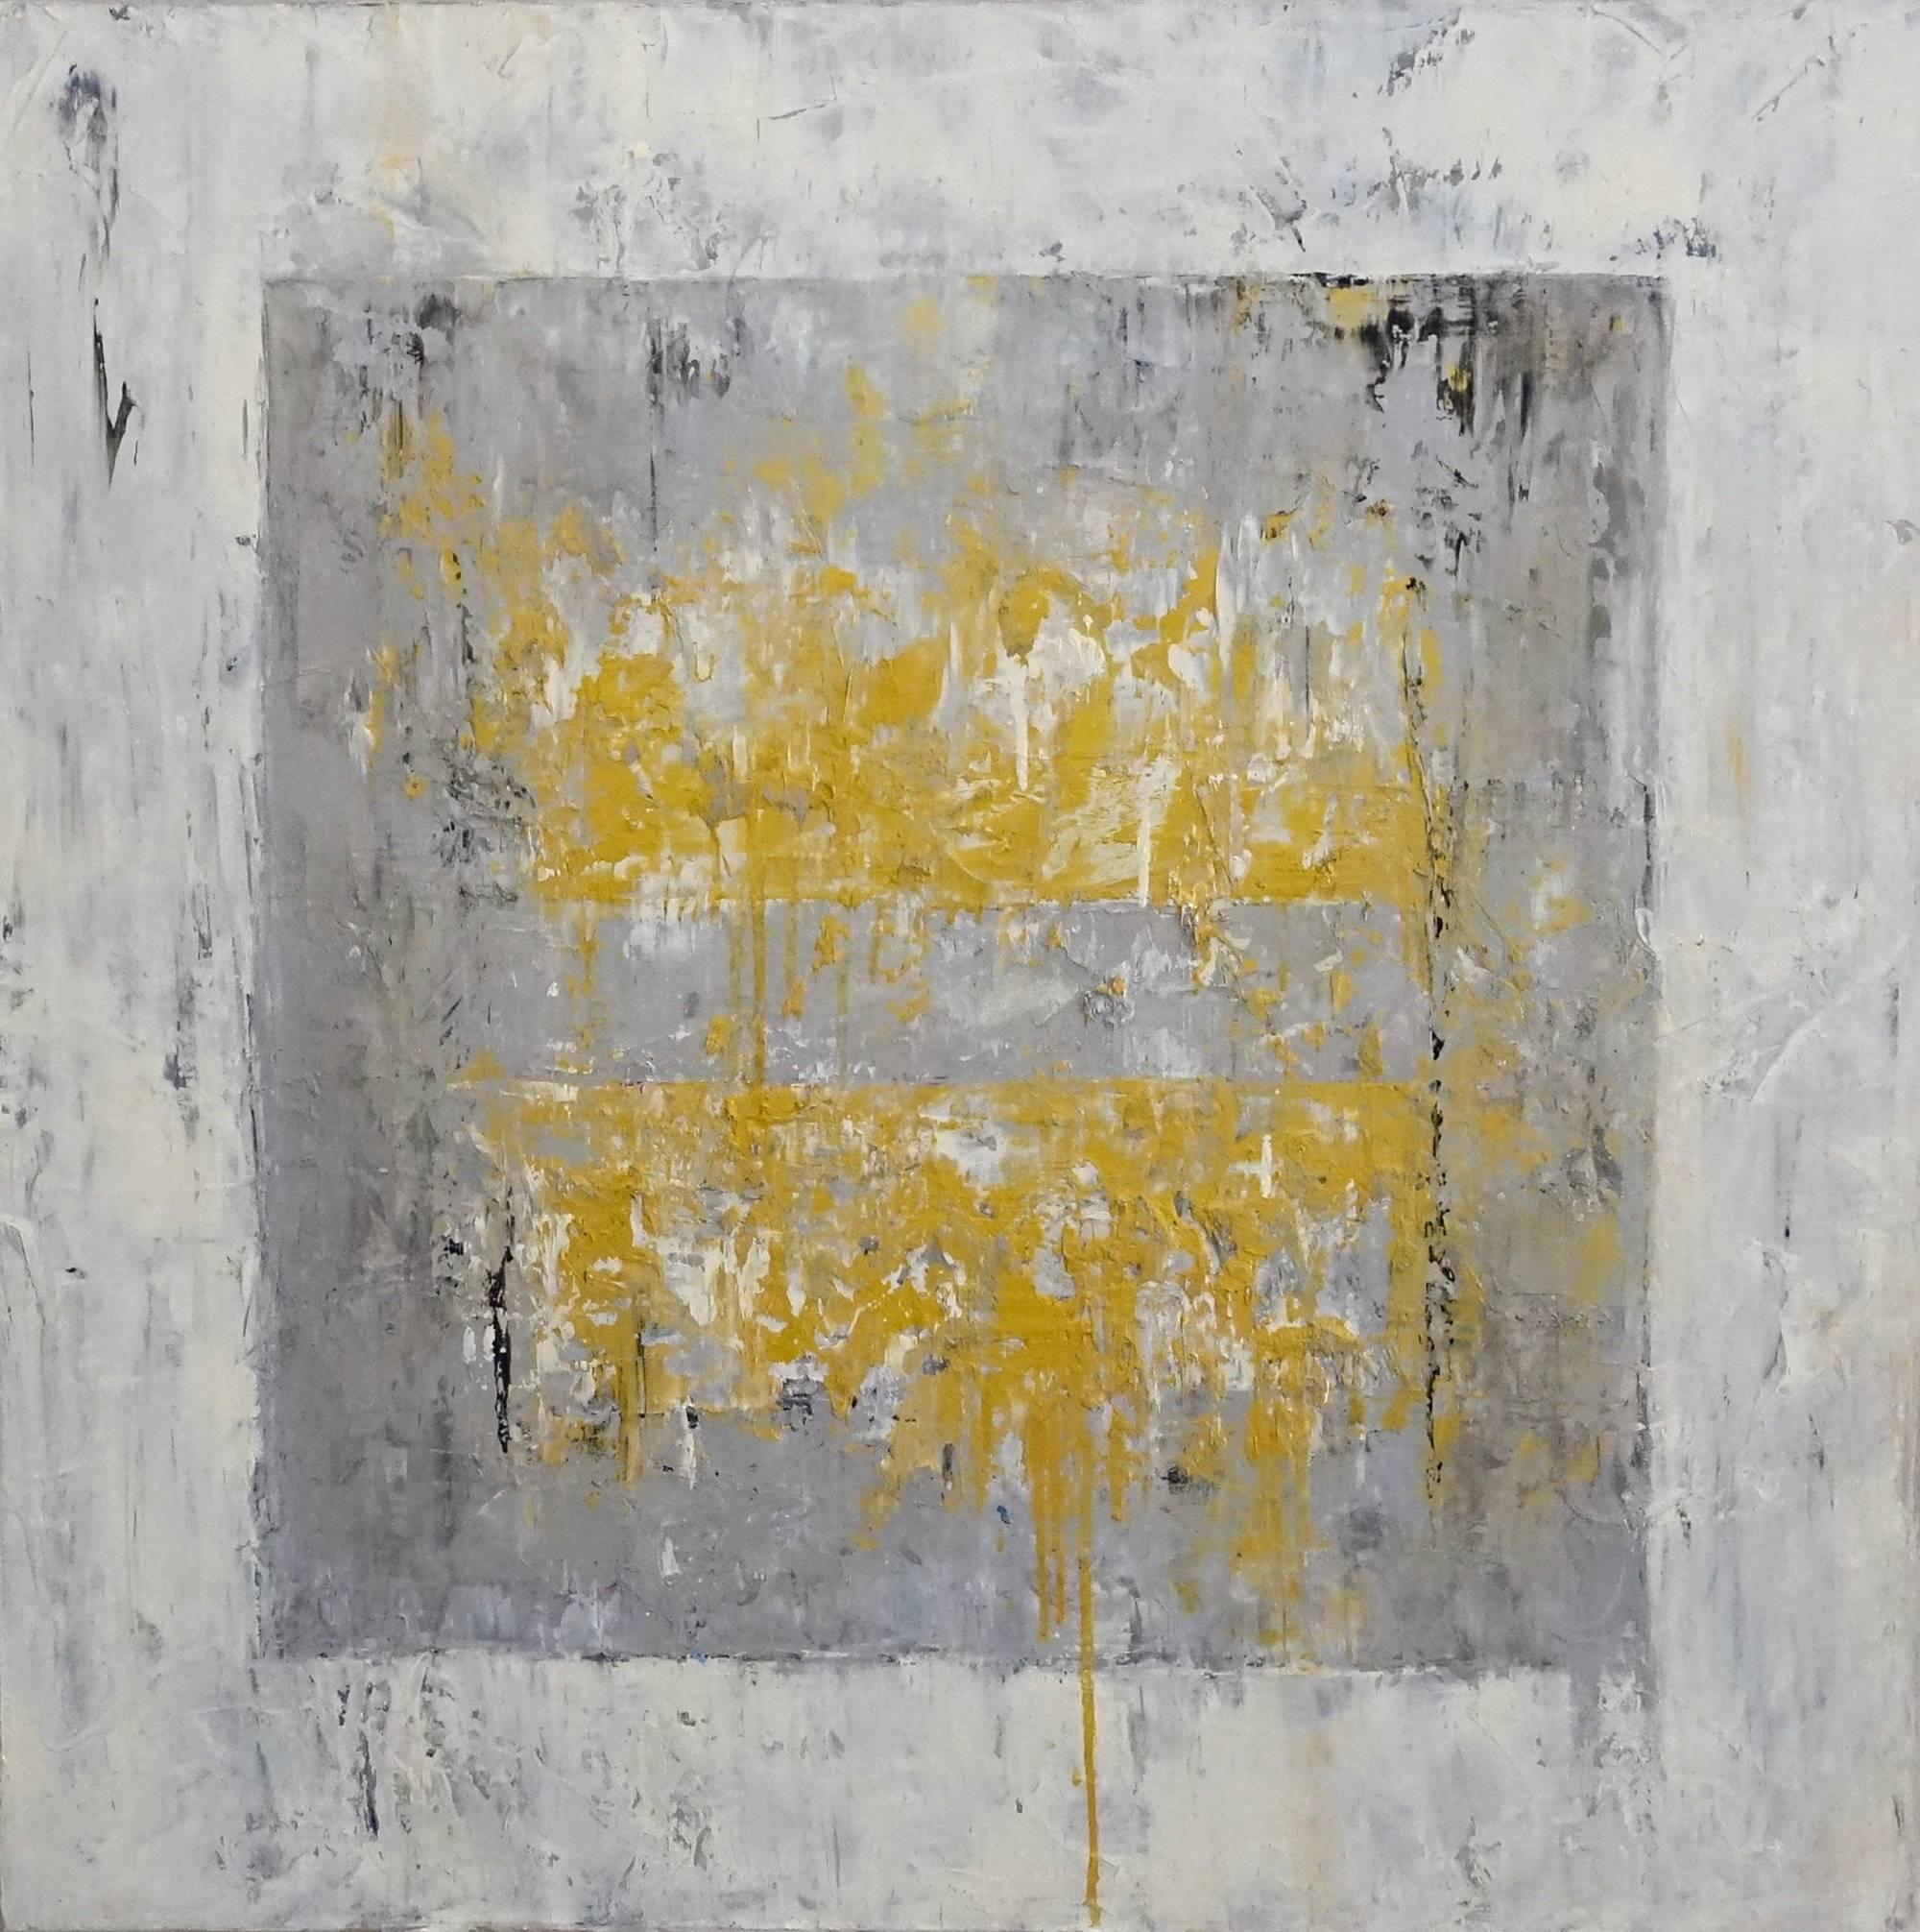 Jill S. Krutick Abstract Drawing - Ice Cube 4 (Gold, Yellow, White, Gray, Silver, Abstract Expressionist Painting)